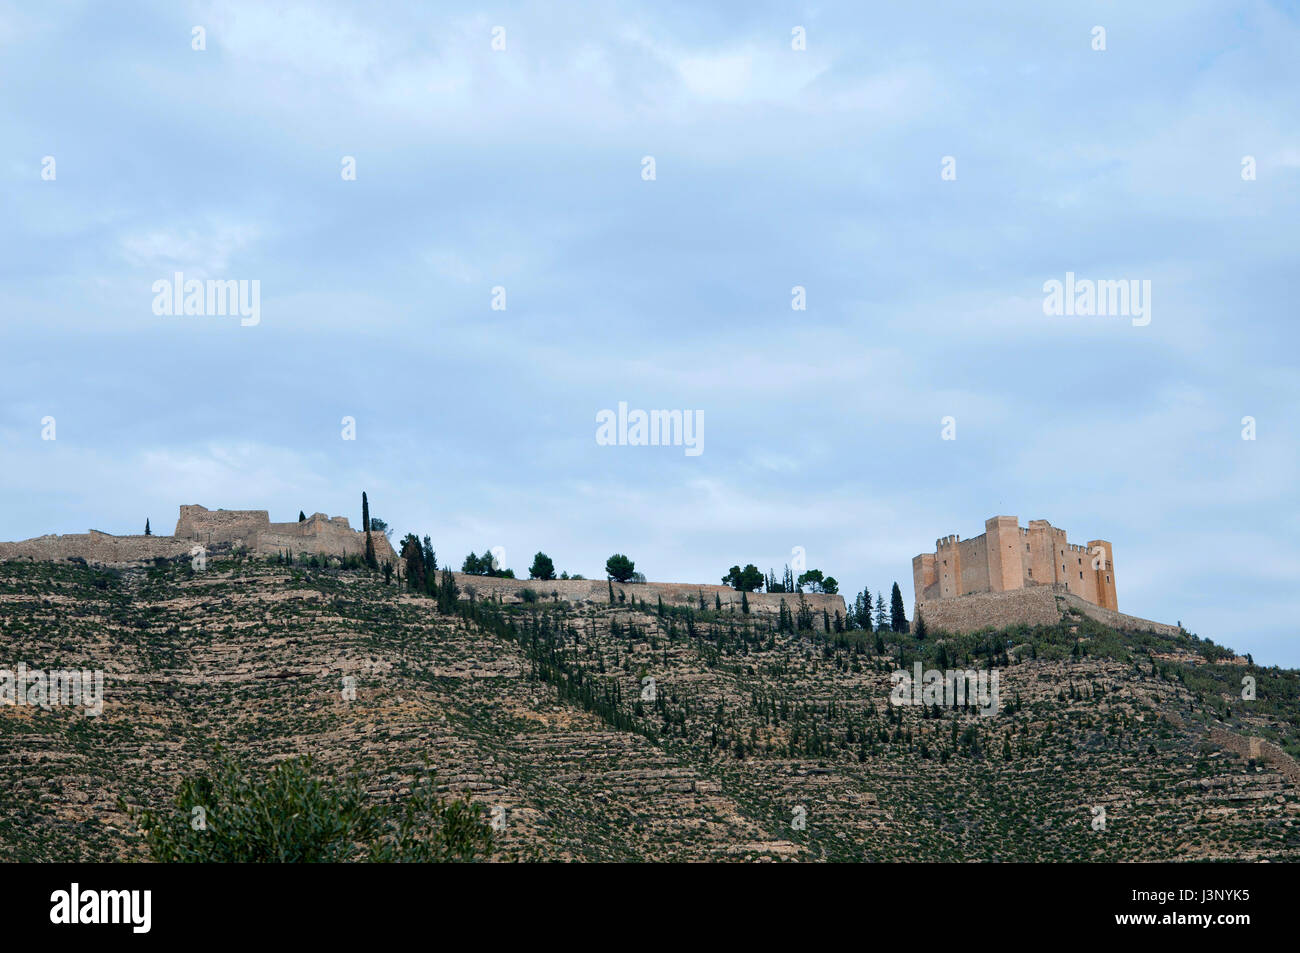 Medieval Castle of Mequinenza built between XIV and XV centuries. Stock Photo